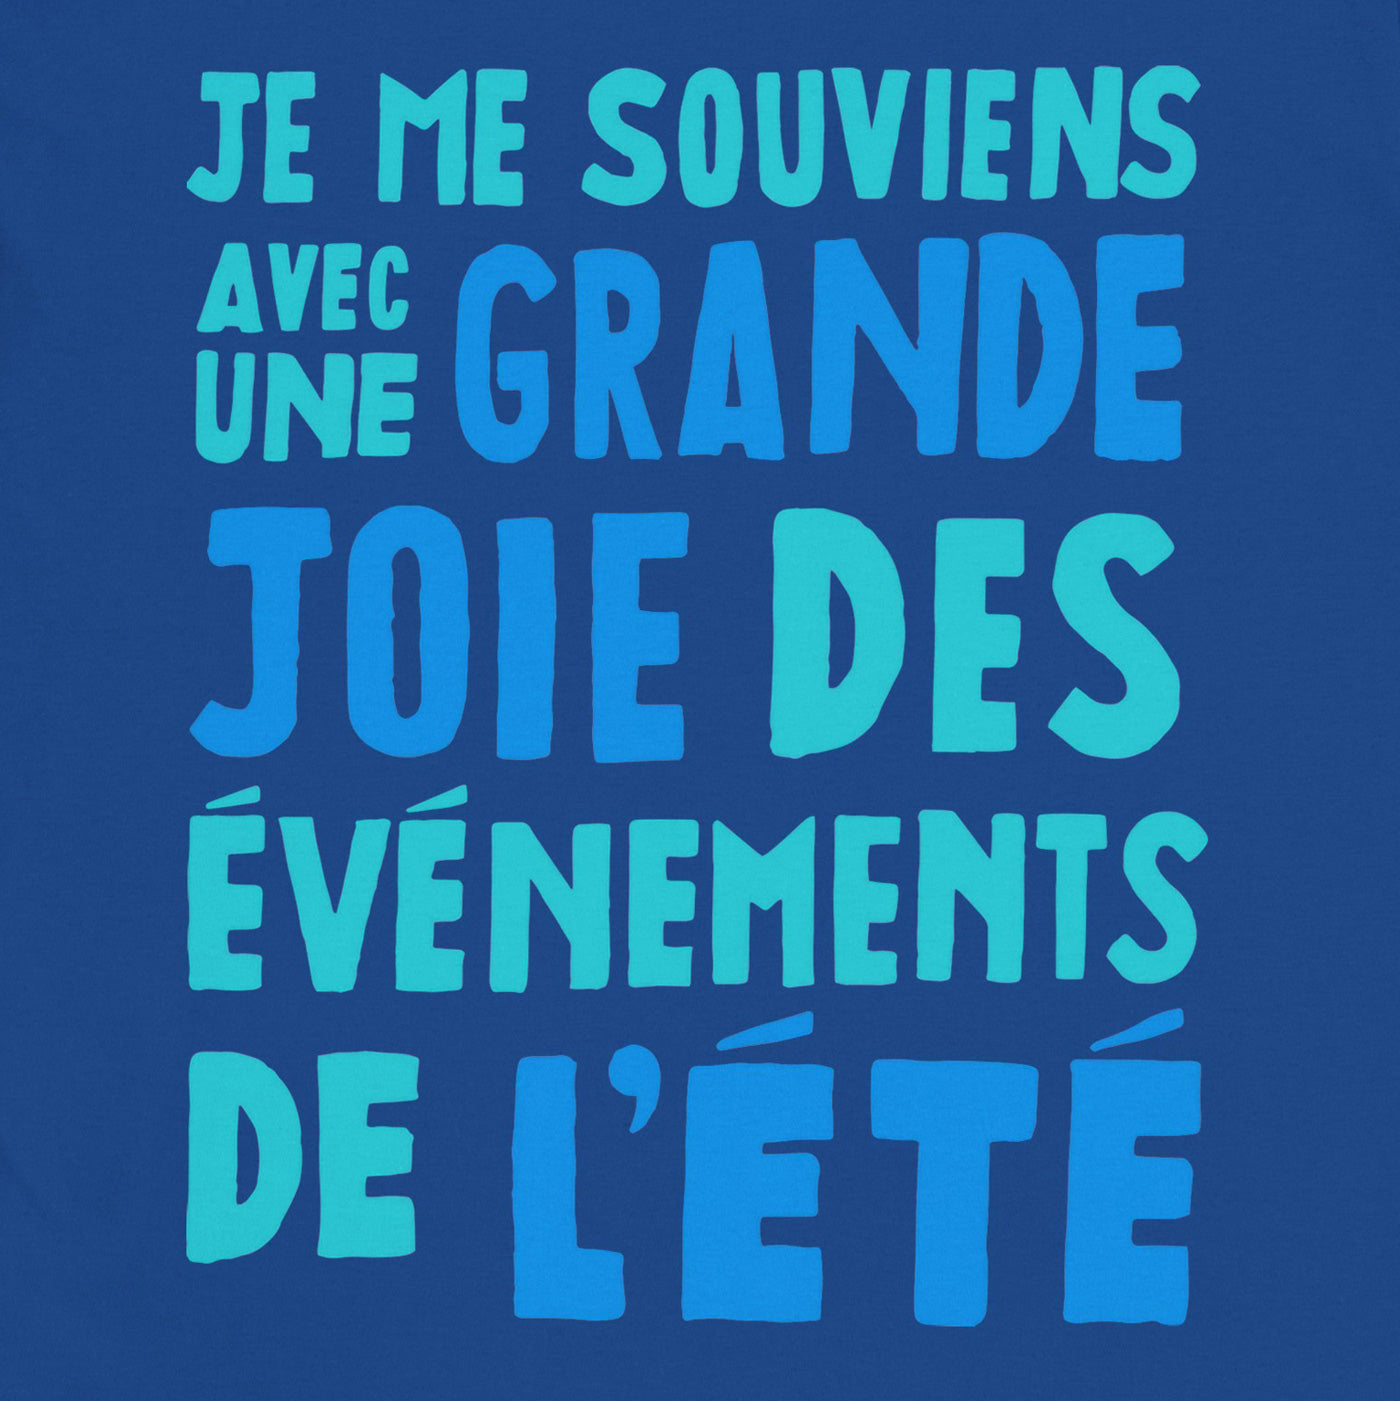 1960s French Cinema Inspired Summer T-Shirt with 'I remember with great joy the events of the summer' Text